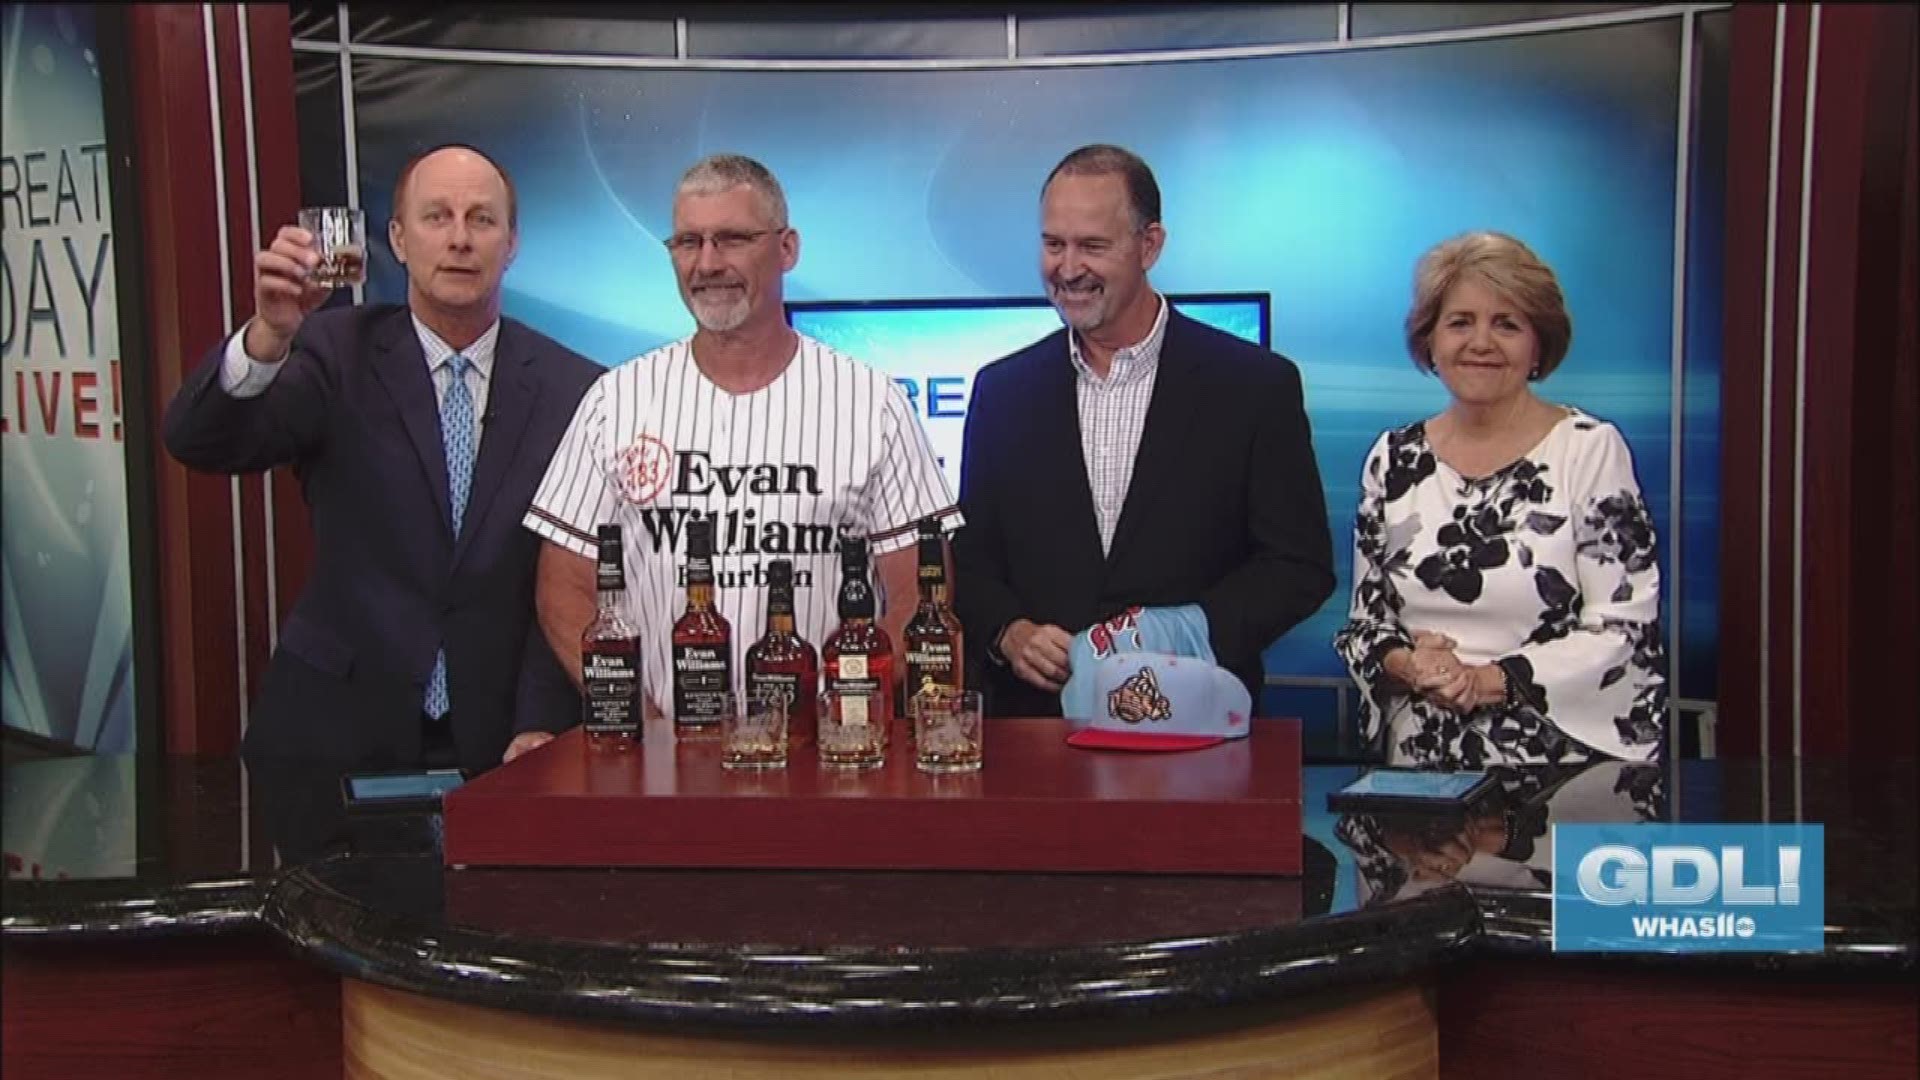 On Saturday, May 26, 2018 the Louisville Bats will become the Louisville Mashers for one night only on "Cheers to Bourbon Night" at Slugger Field.